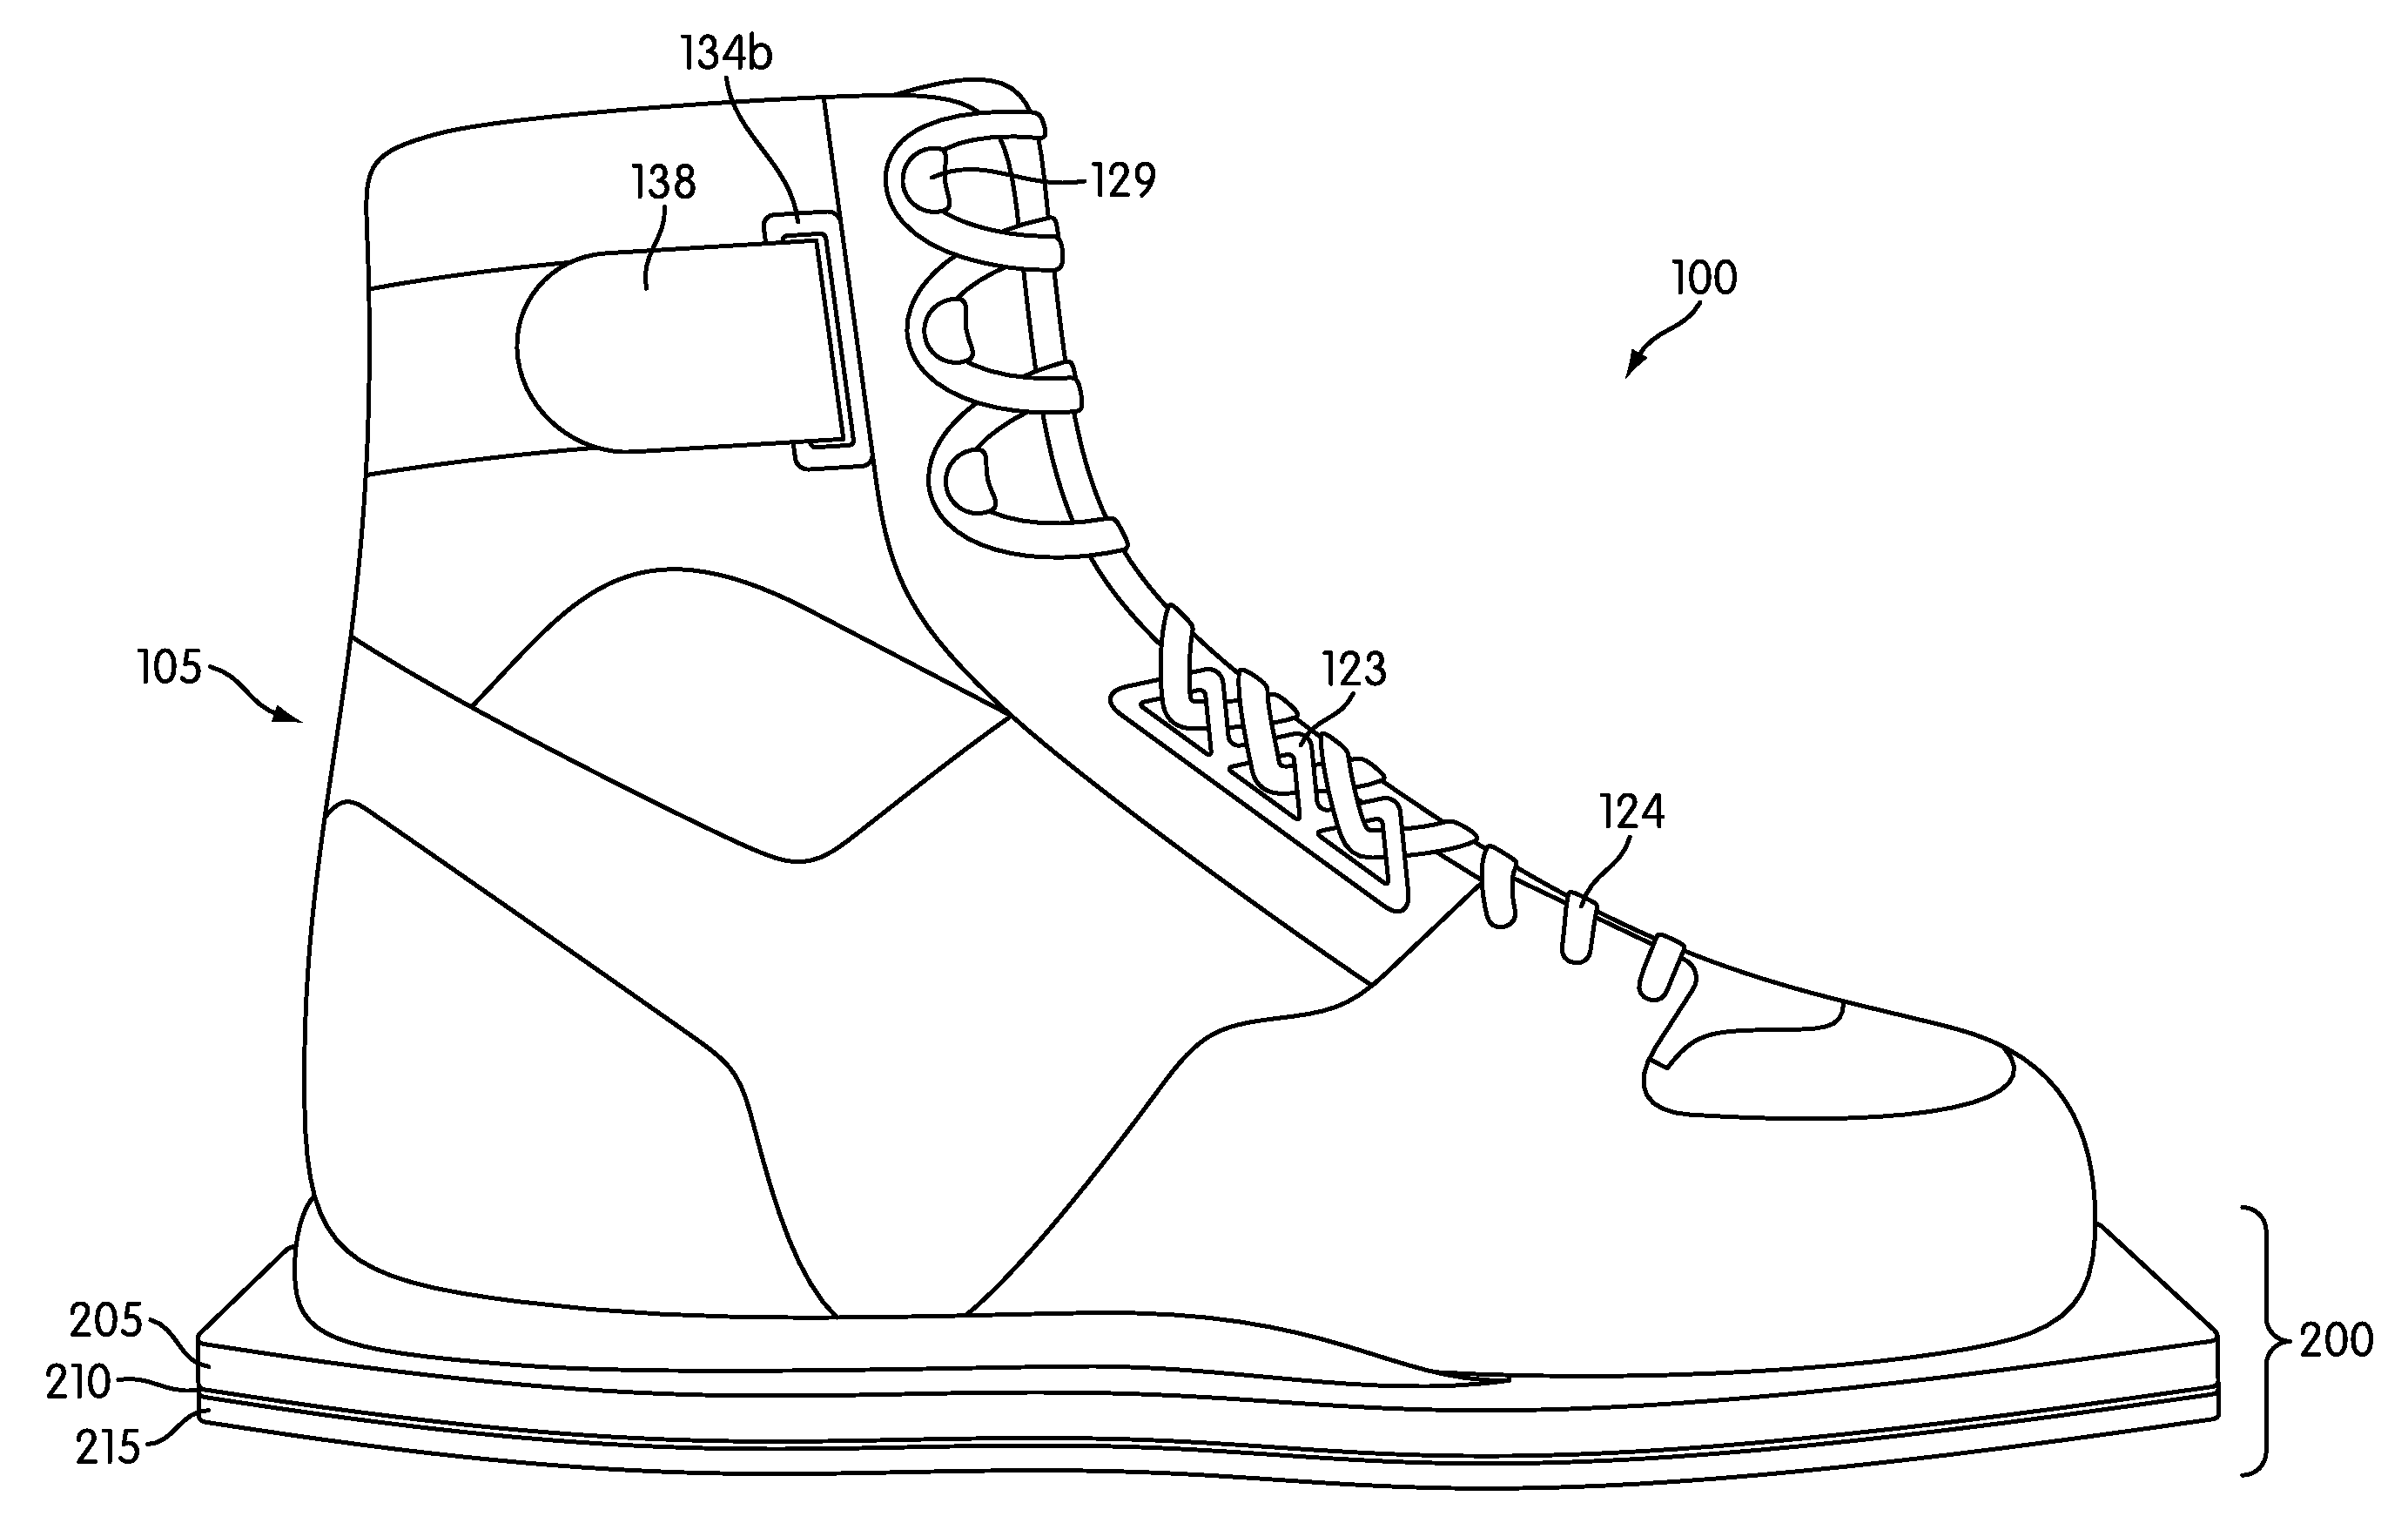 Article of footwear with improved stability and balance